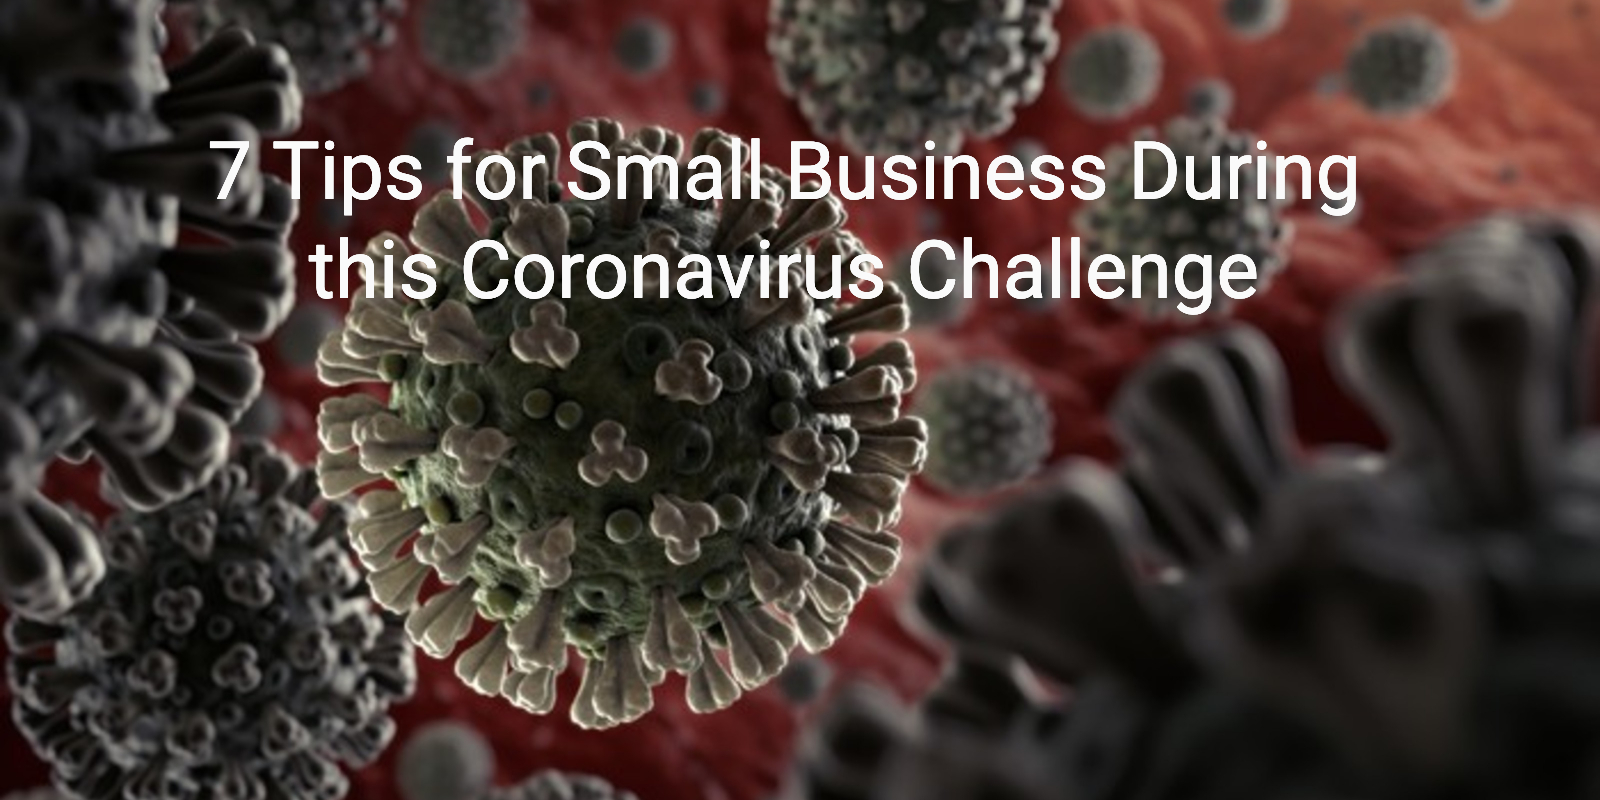 7 Tips for Small Business During this Coronavirus Challenge